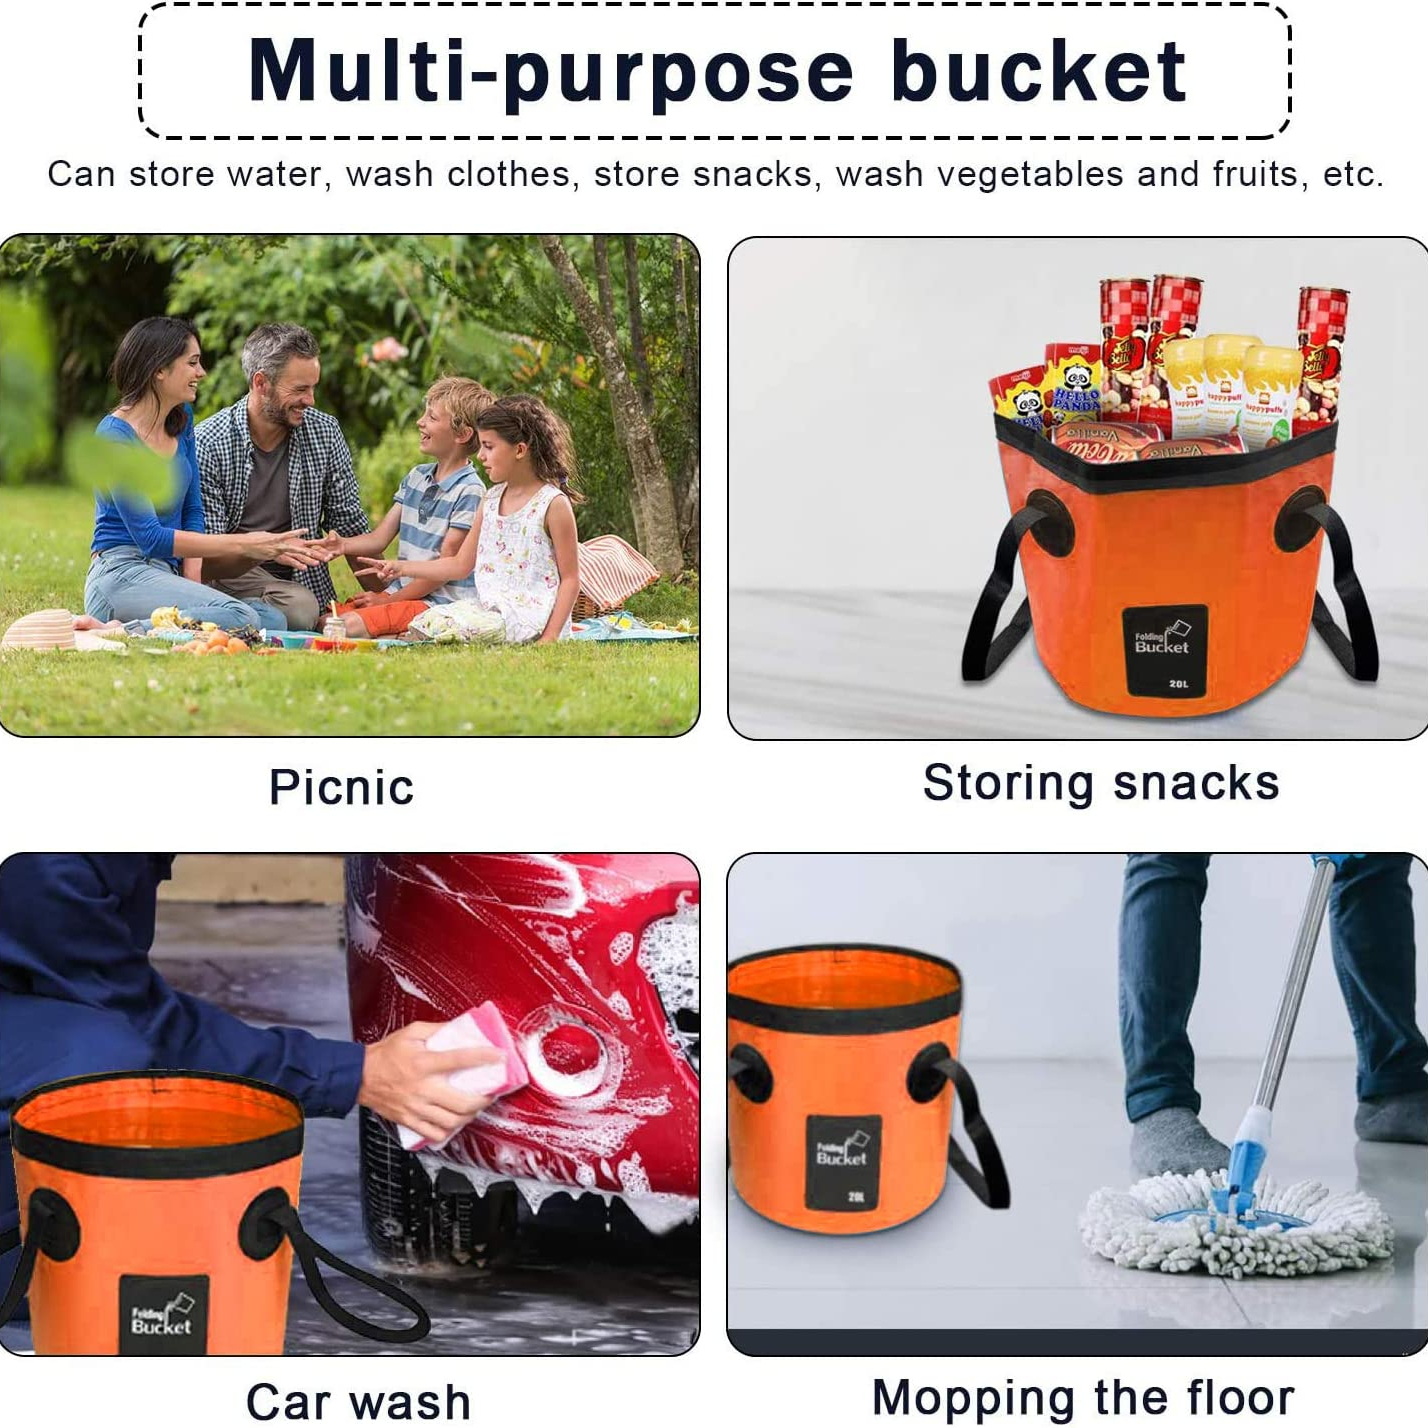 Collapsible Bucket 5 Gallon, Portable Foldable Bucket Water Container Wash Basin, Bait Bucket Ice Fishing Bucket Canvas Bucket, Camping Gear Portable